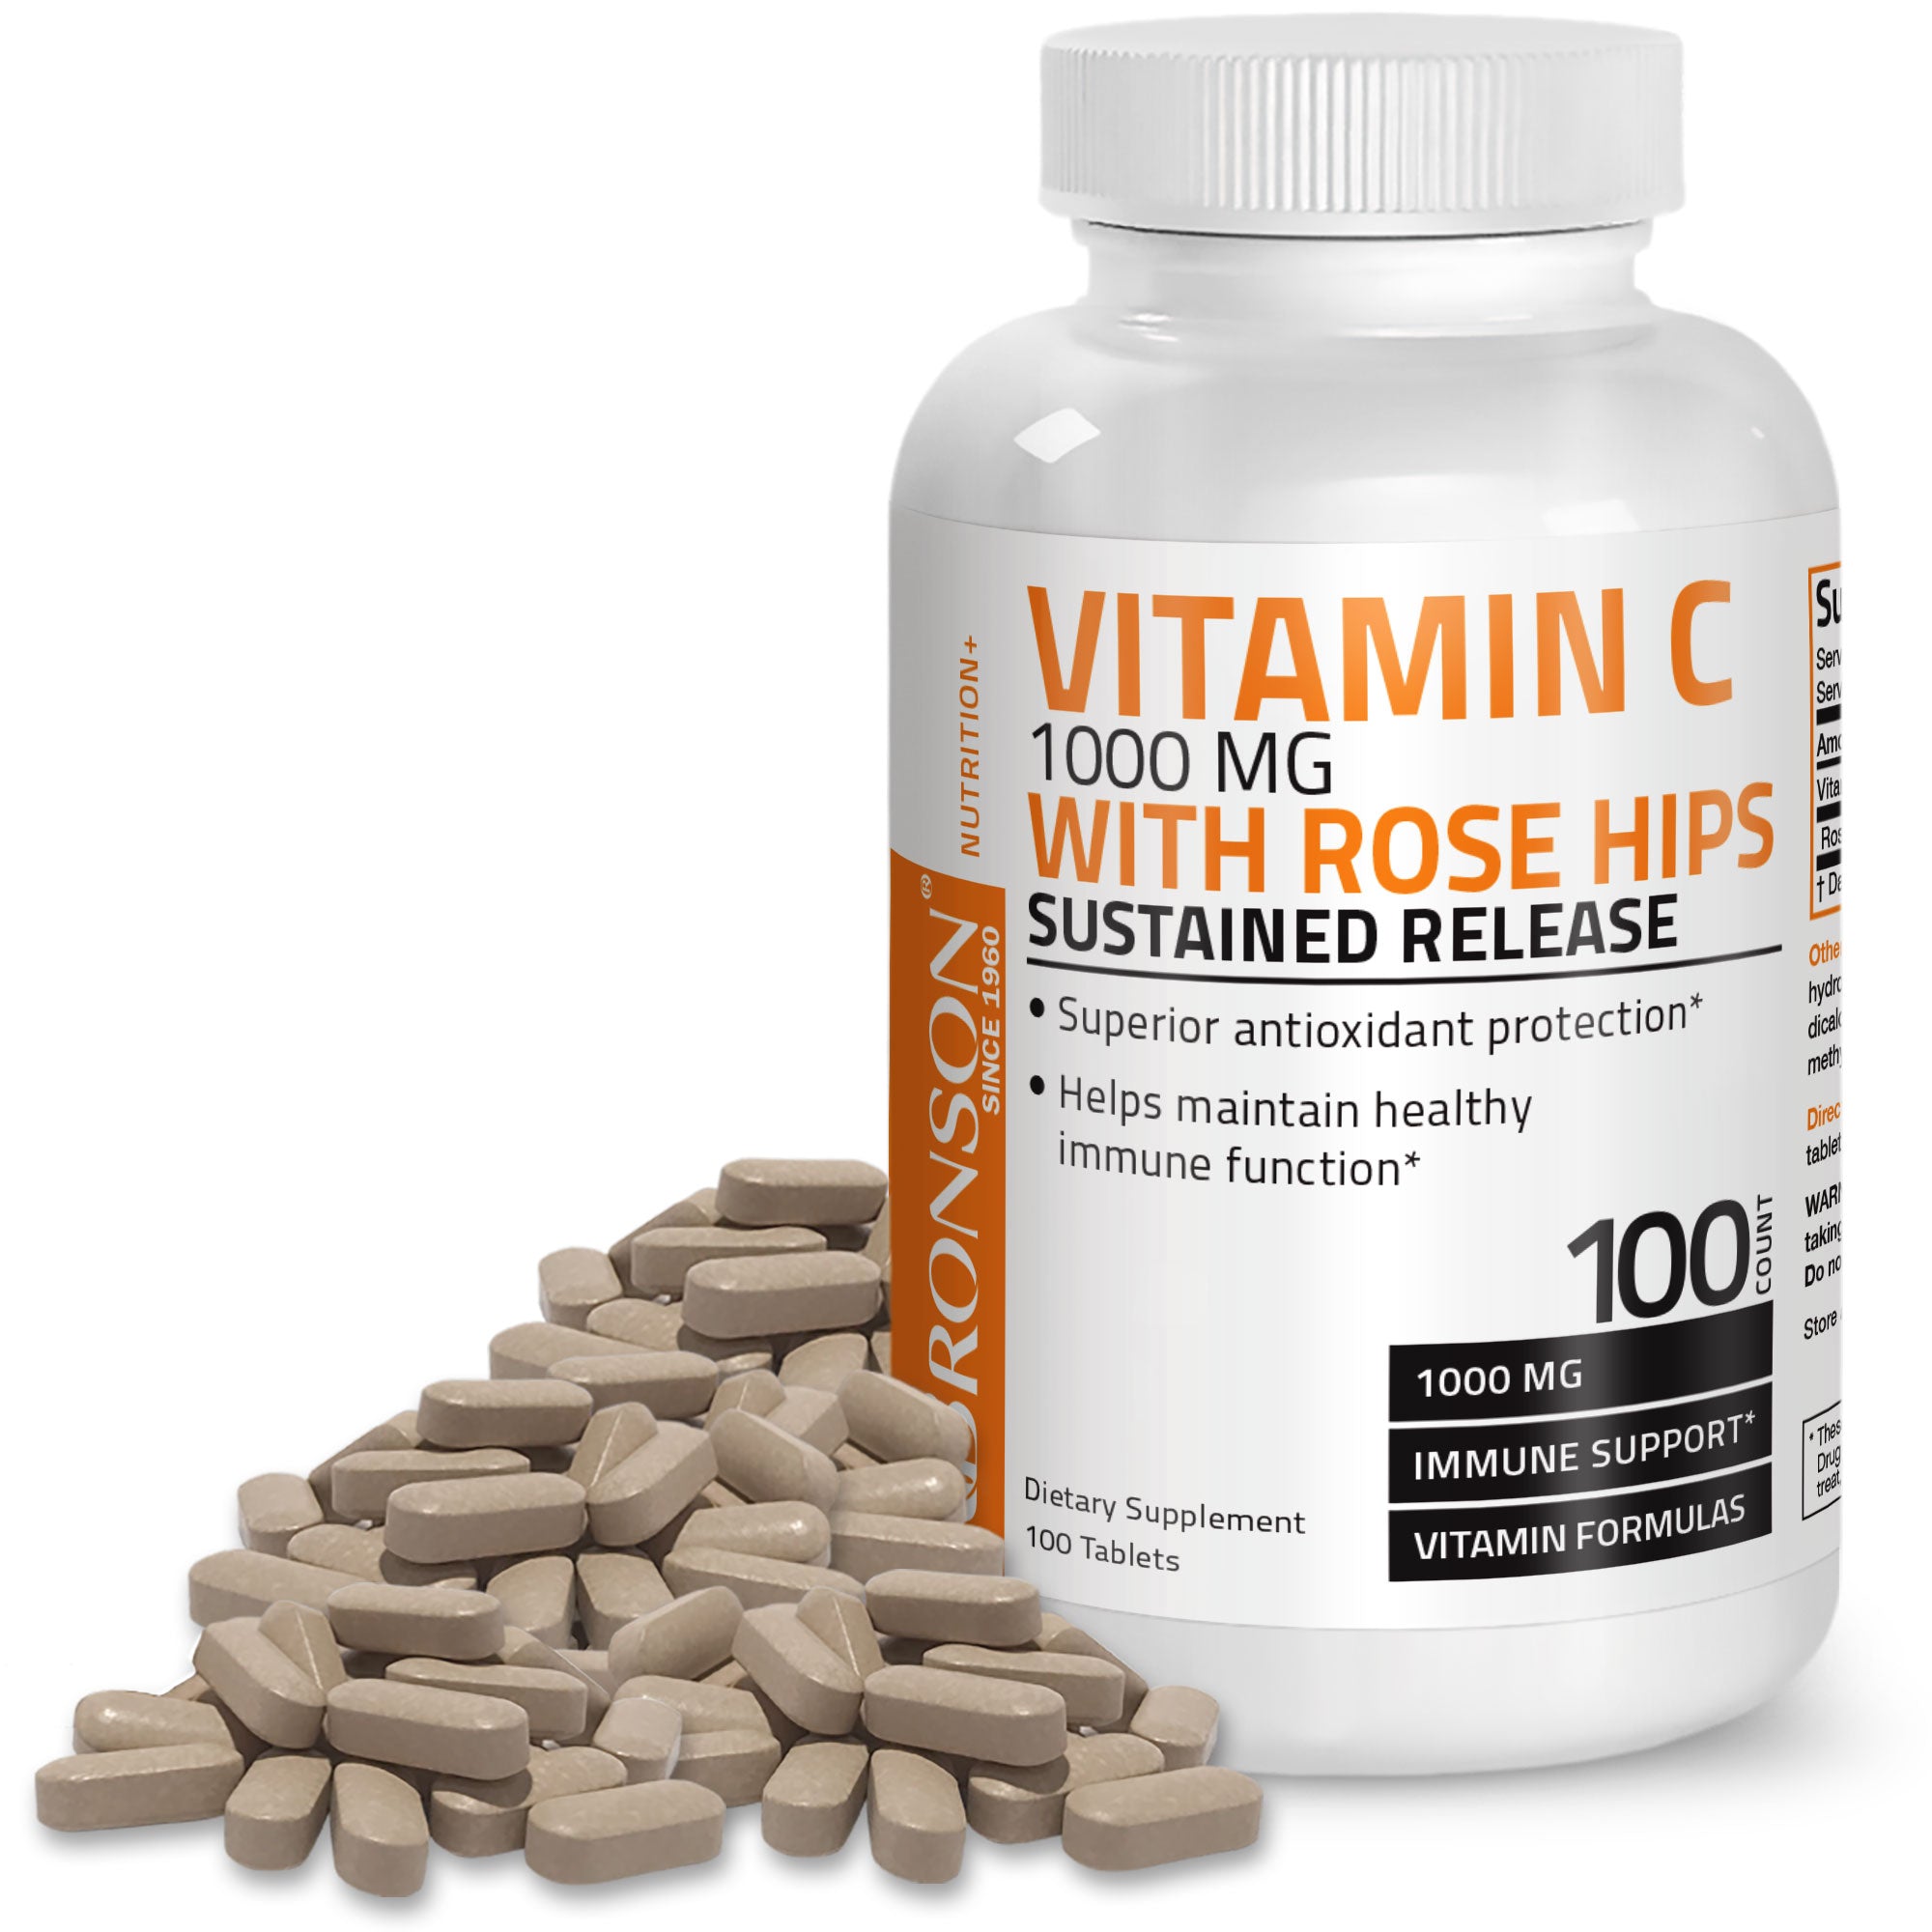 Vitamin C Ascorbic Acid Sustained Release with Rose Hips - 1,000 mg view 5 of 4